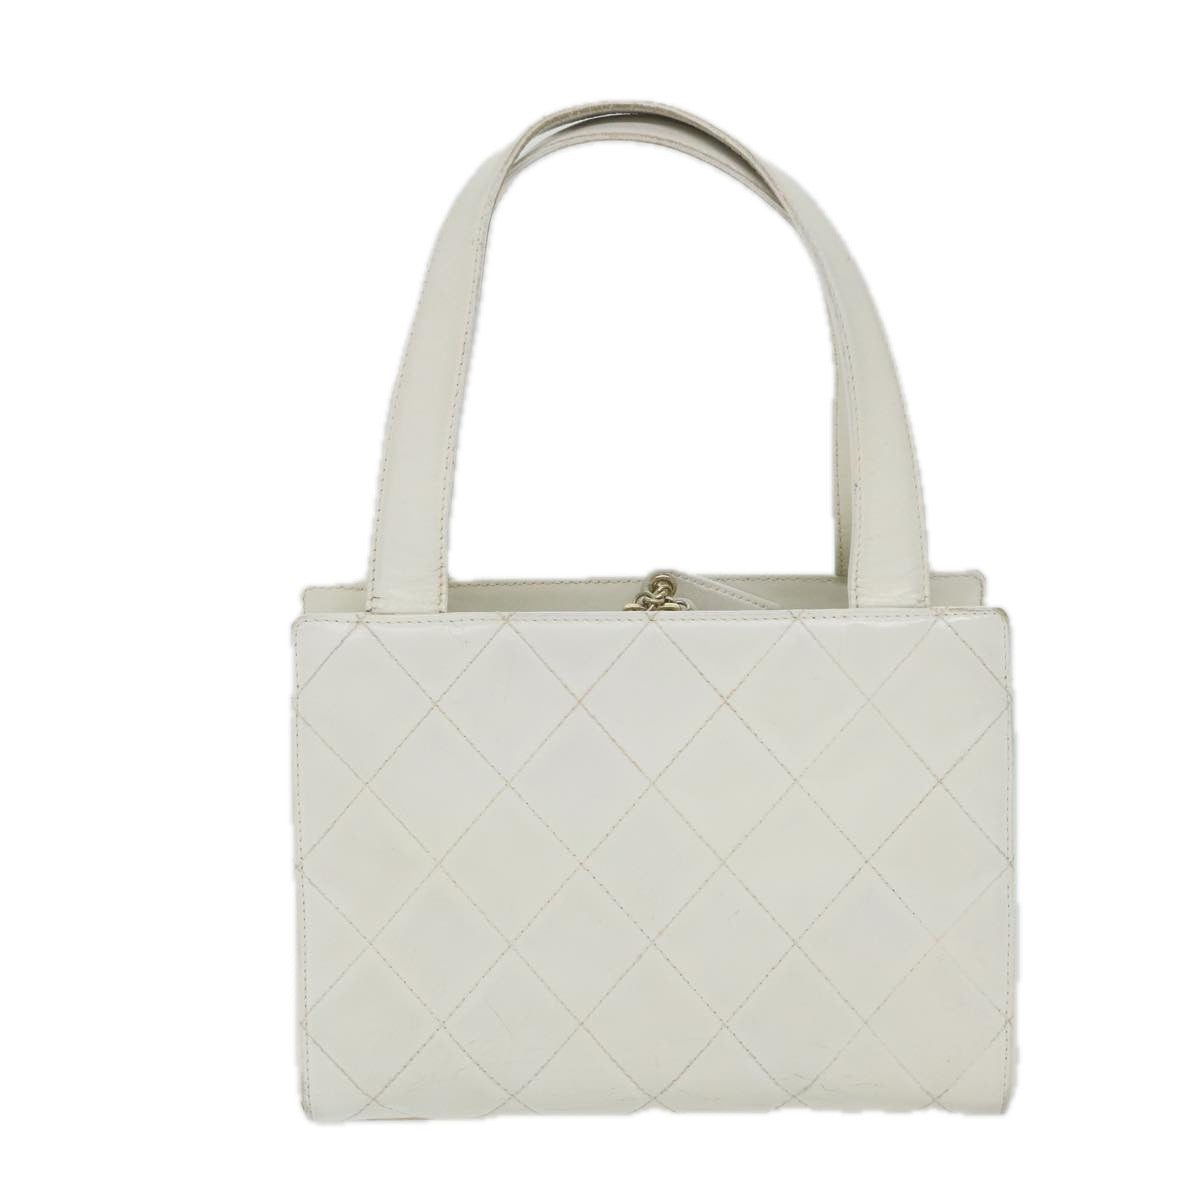 CHANEL Wild Stitch Tote Bag Leather White CC Auth bs9577 - 0